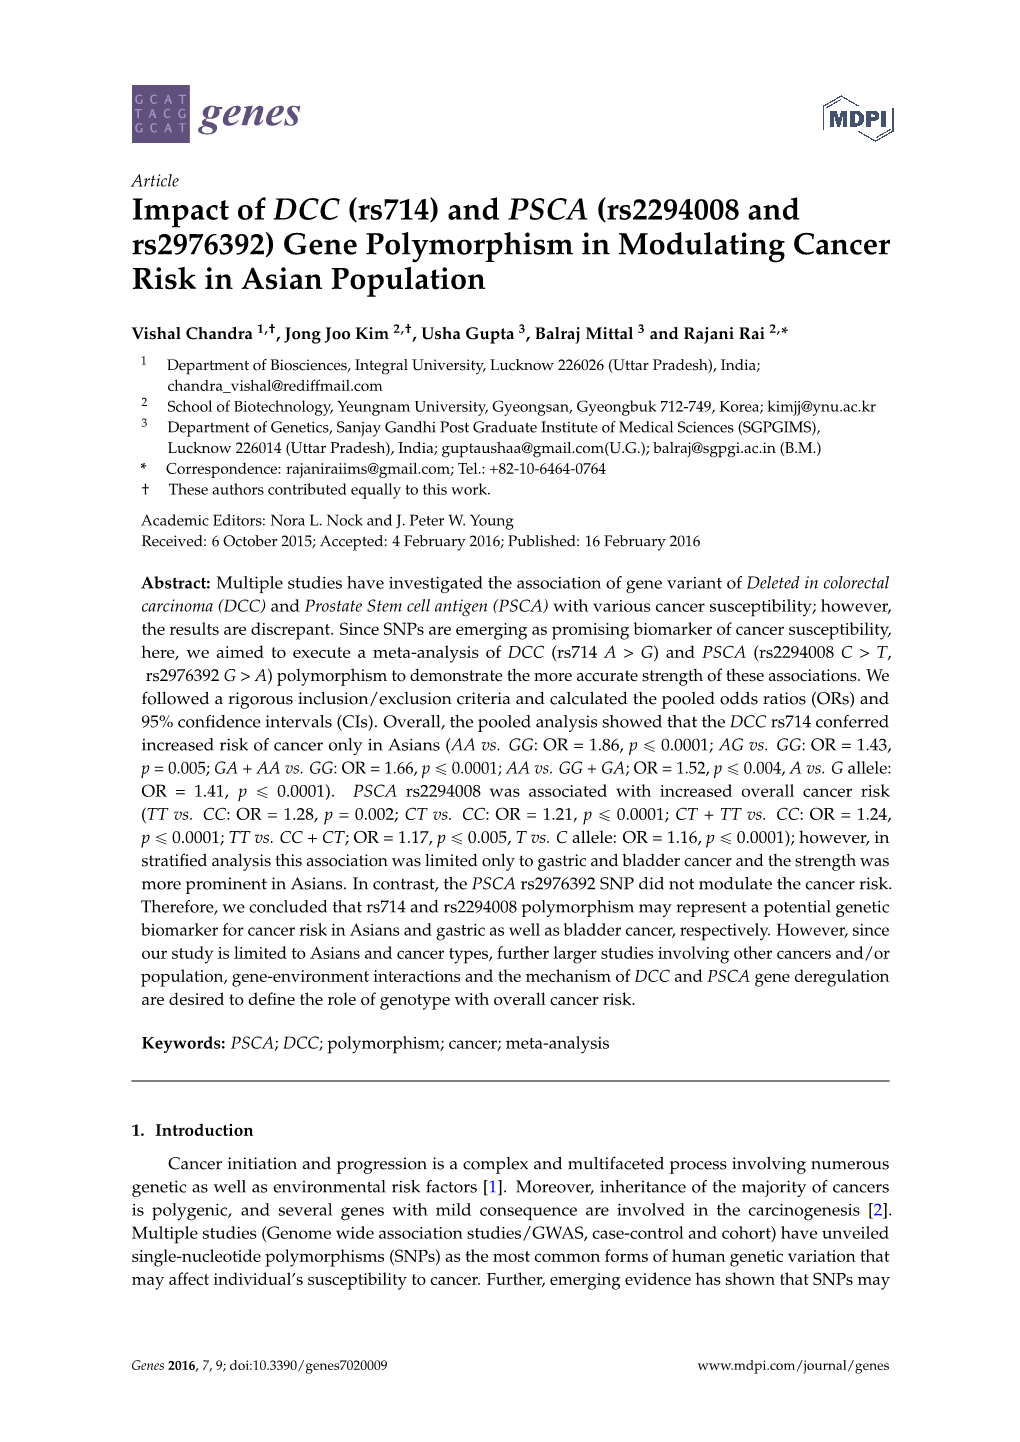 Impact of DCC (Rs714) and PSCA (Rs2294008 and Rs2976392) Gene Polymorphism in Modulating Cancer Risk in Asian Population